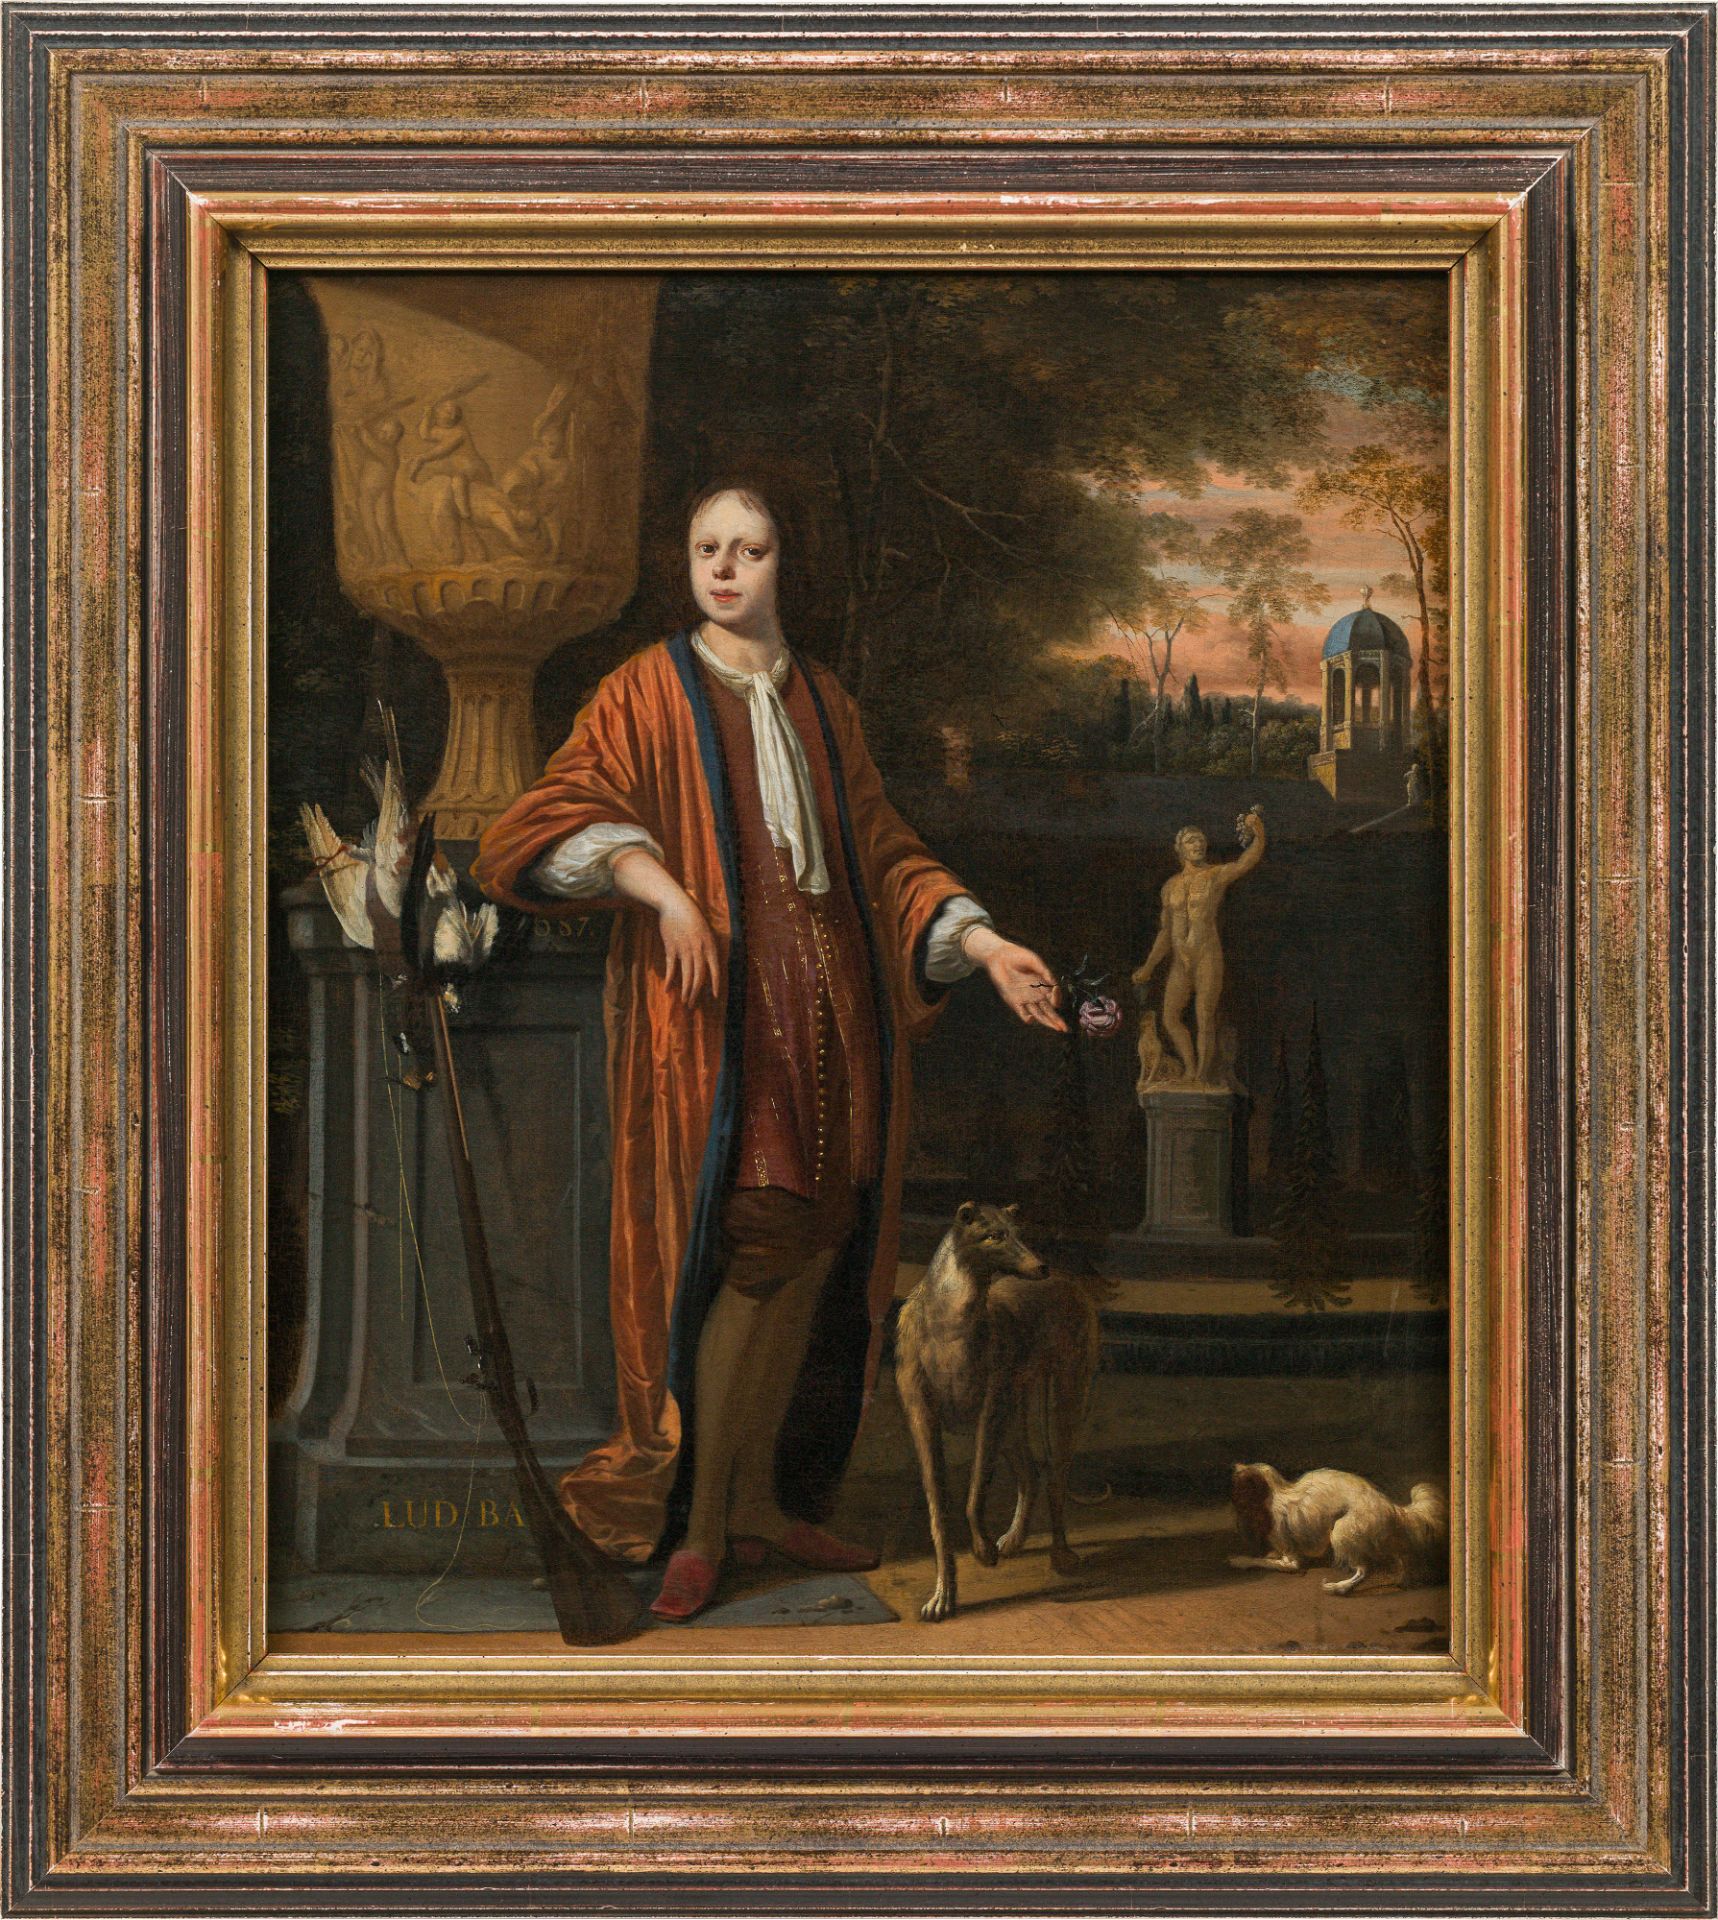 Ludolf BackhuyzenMale portrait ("Self-portrait as a hunter" ?)1687oil on canvas42.5 x 36 cmsigned on - Image 2 of 2